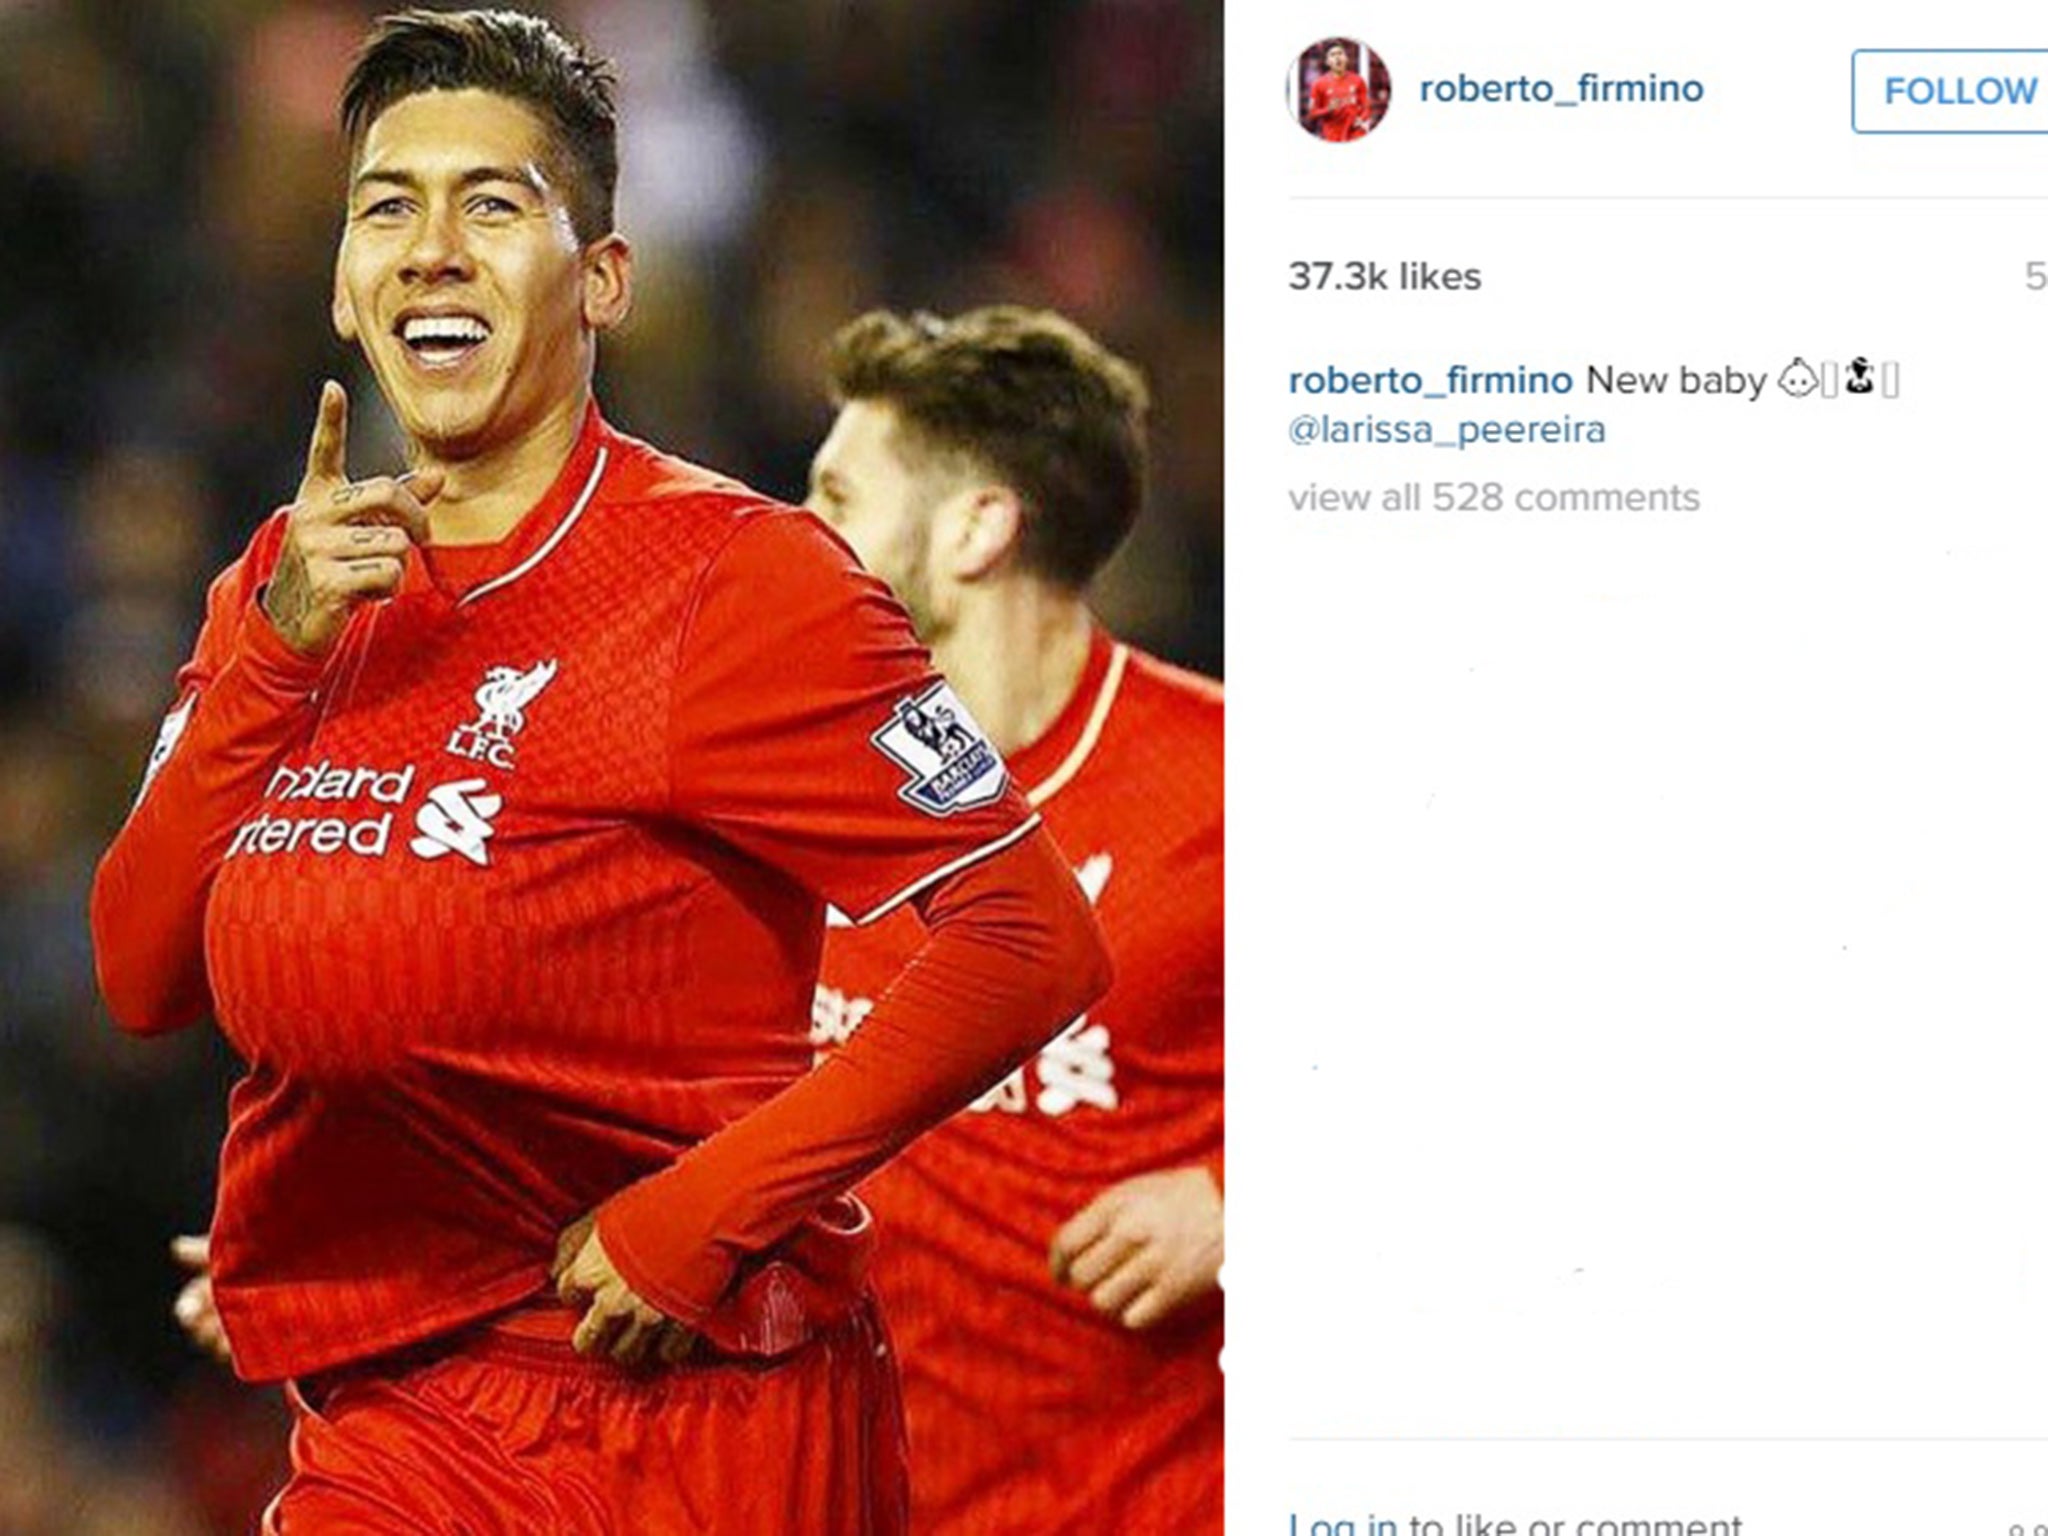 Roberto Firmino's message he put on instagram after the game